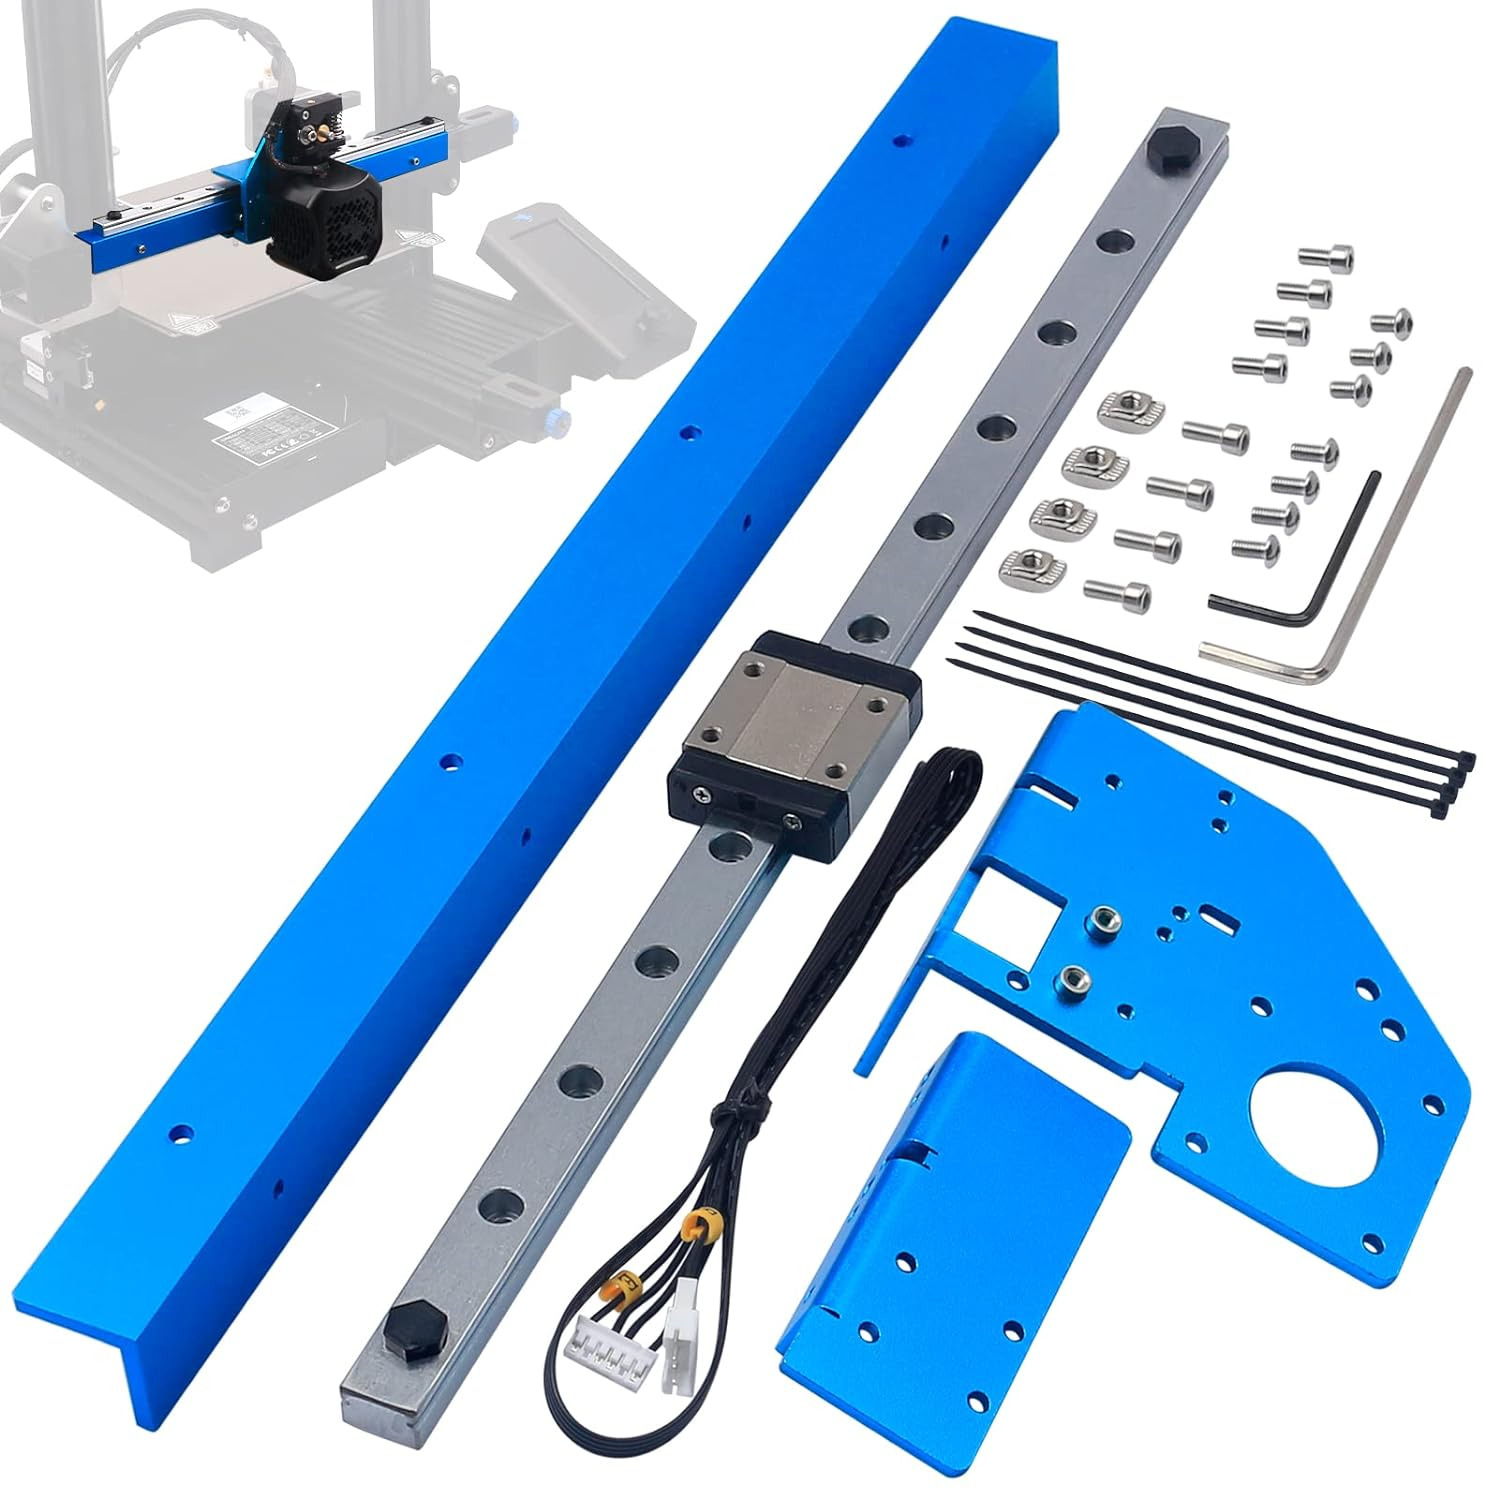 ENOMAKER Ender 3 Upgrade Linear Rail Guide Kit X Axis with Direct Drive Extruder